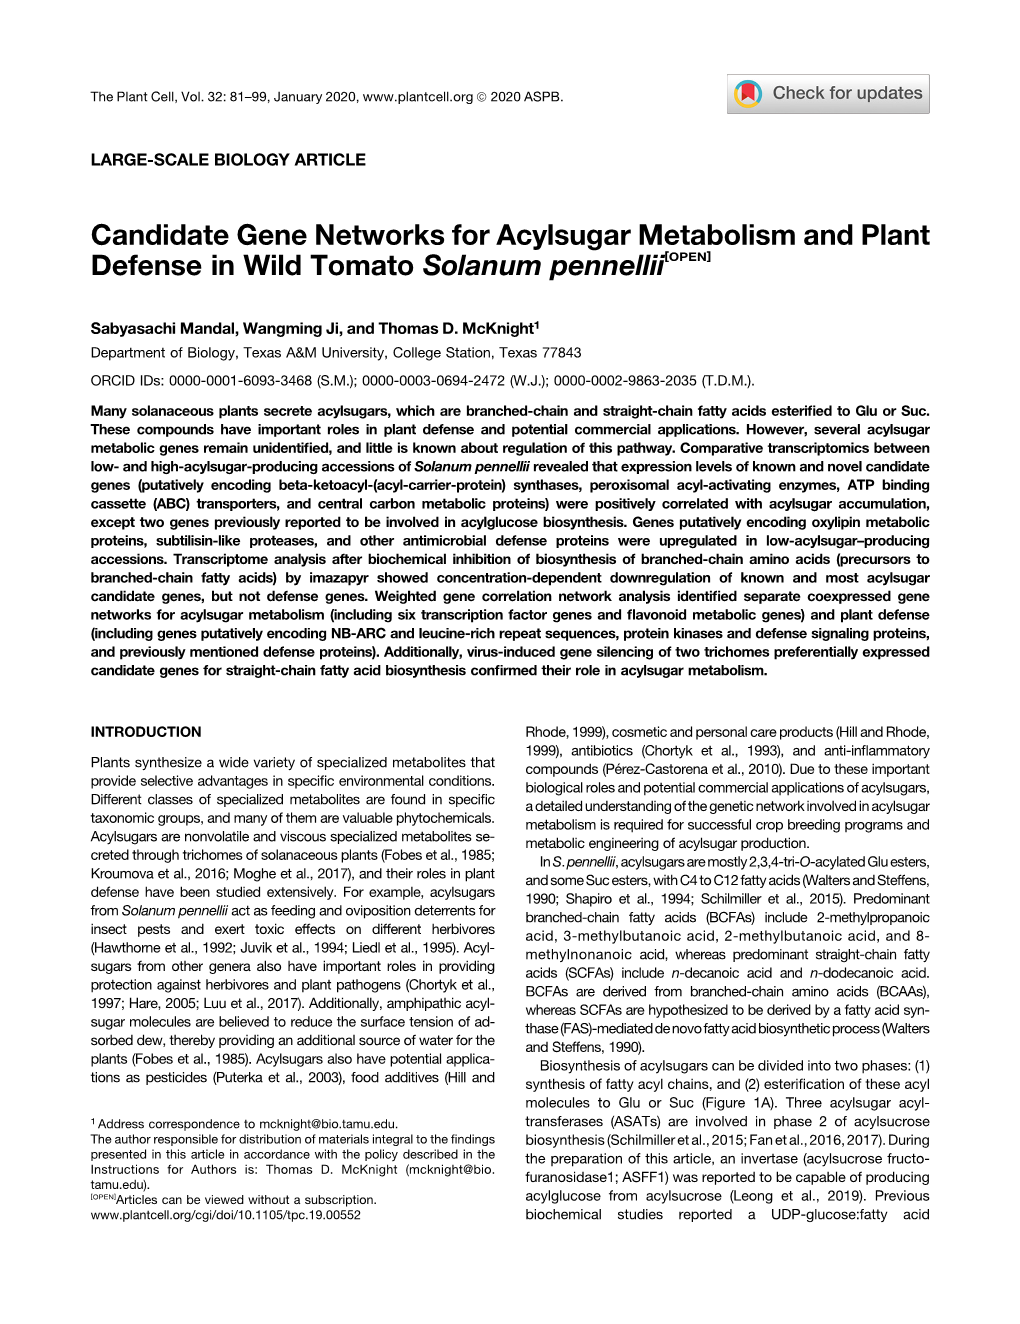 Candidate Gene Networks for Acylsugar Metabolism and Plant Defense in Wild Tomato Solanum Pennellii[OPEN]